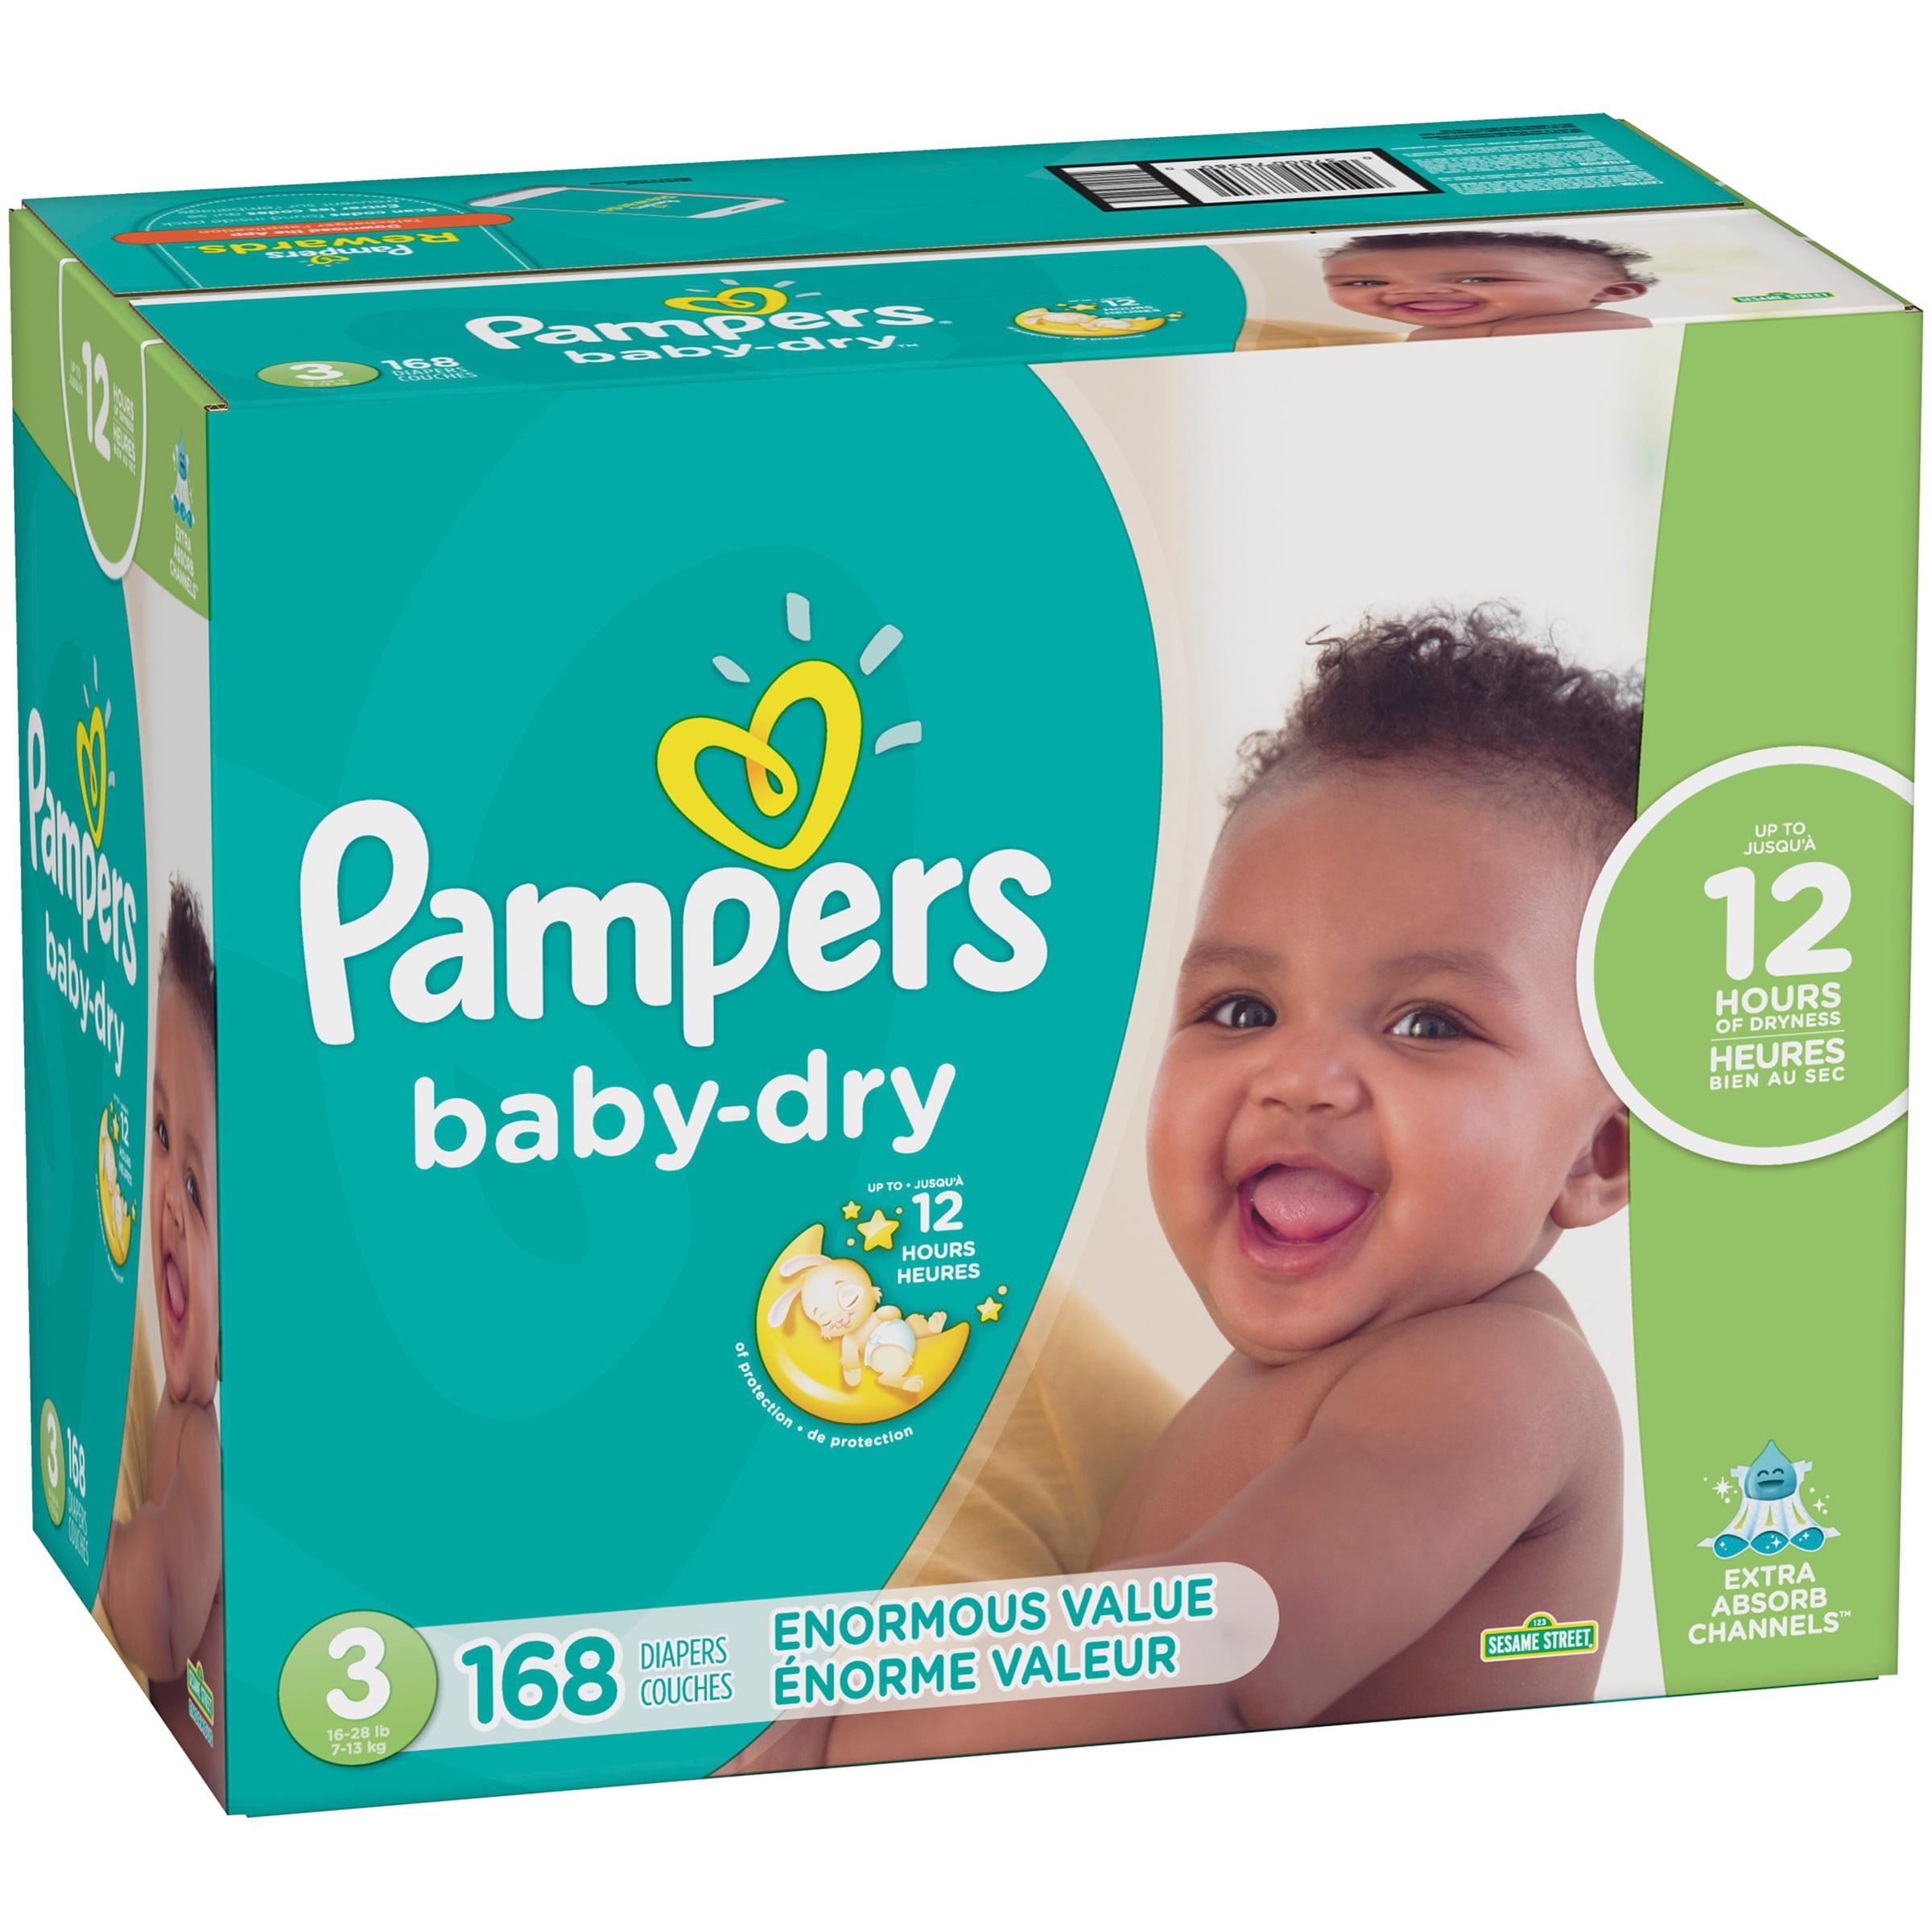 pampers swaddlers size 3 168